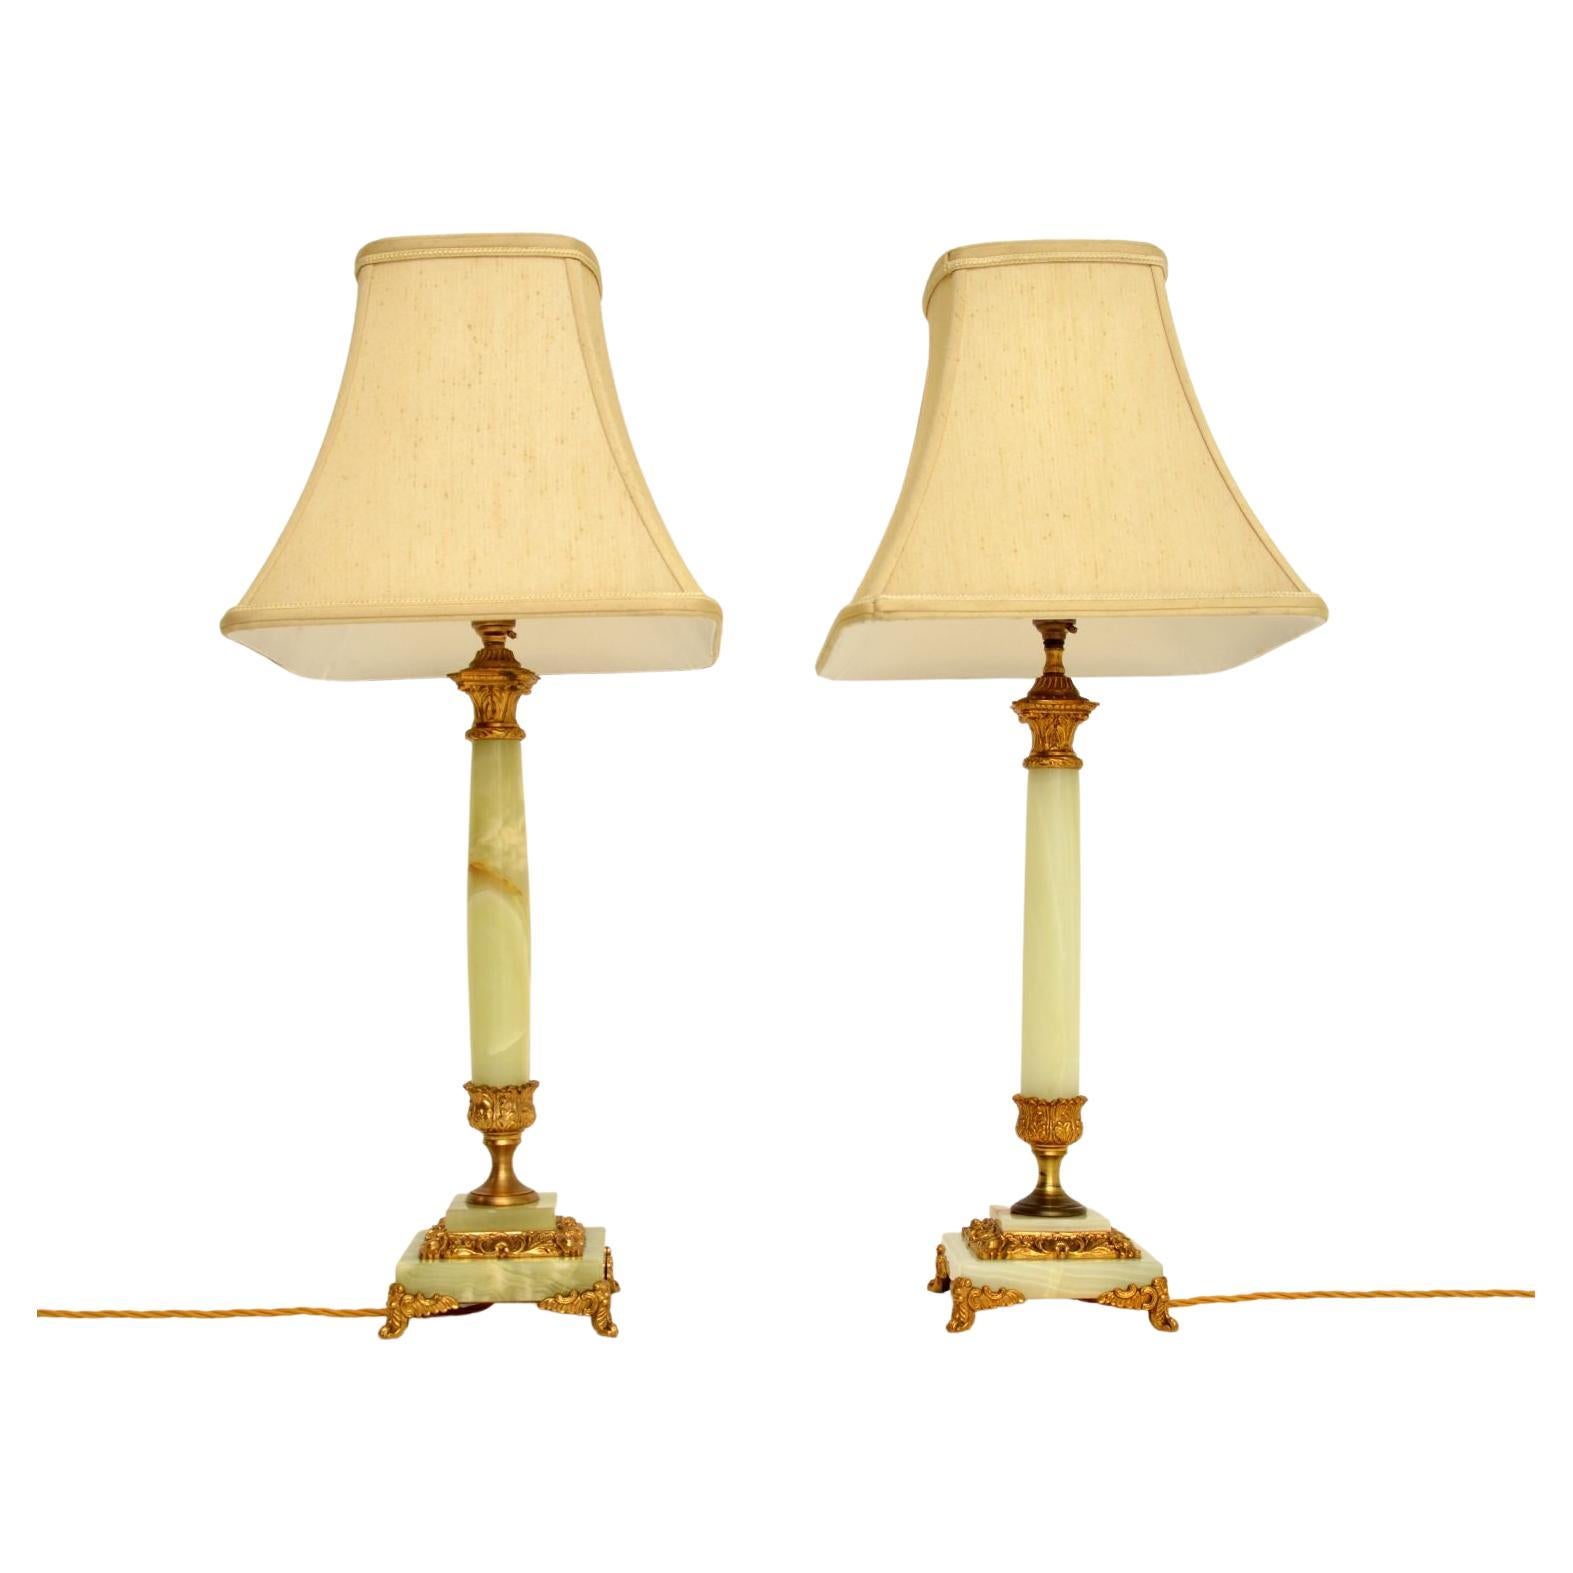 Pair of Antique Neoclassical Style Brass & Onyx Table Lamps